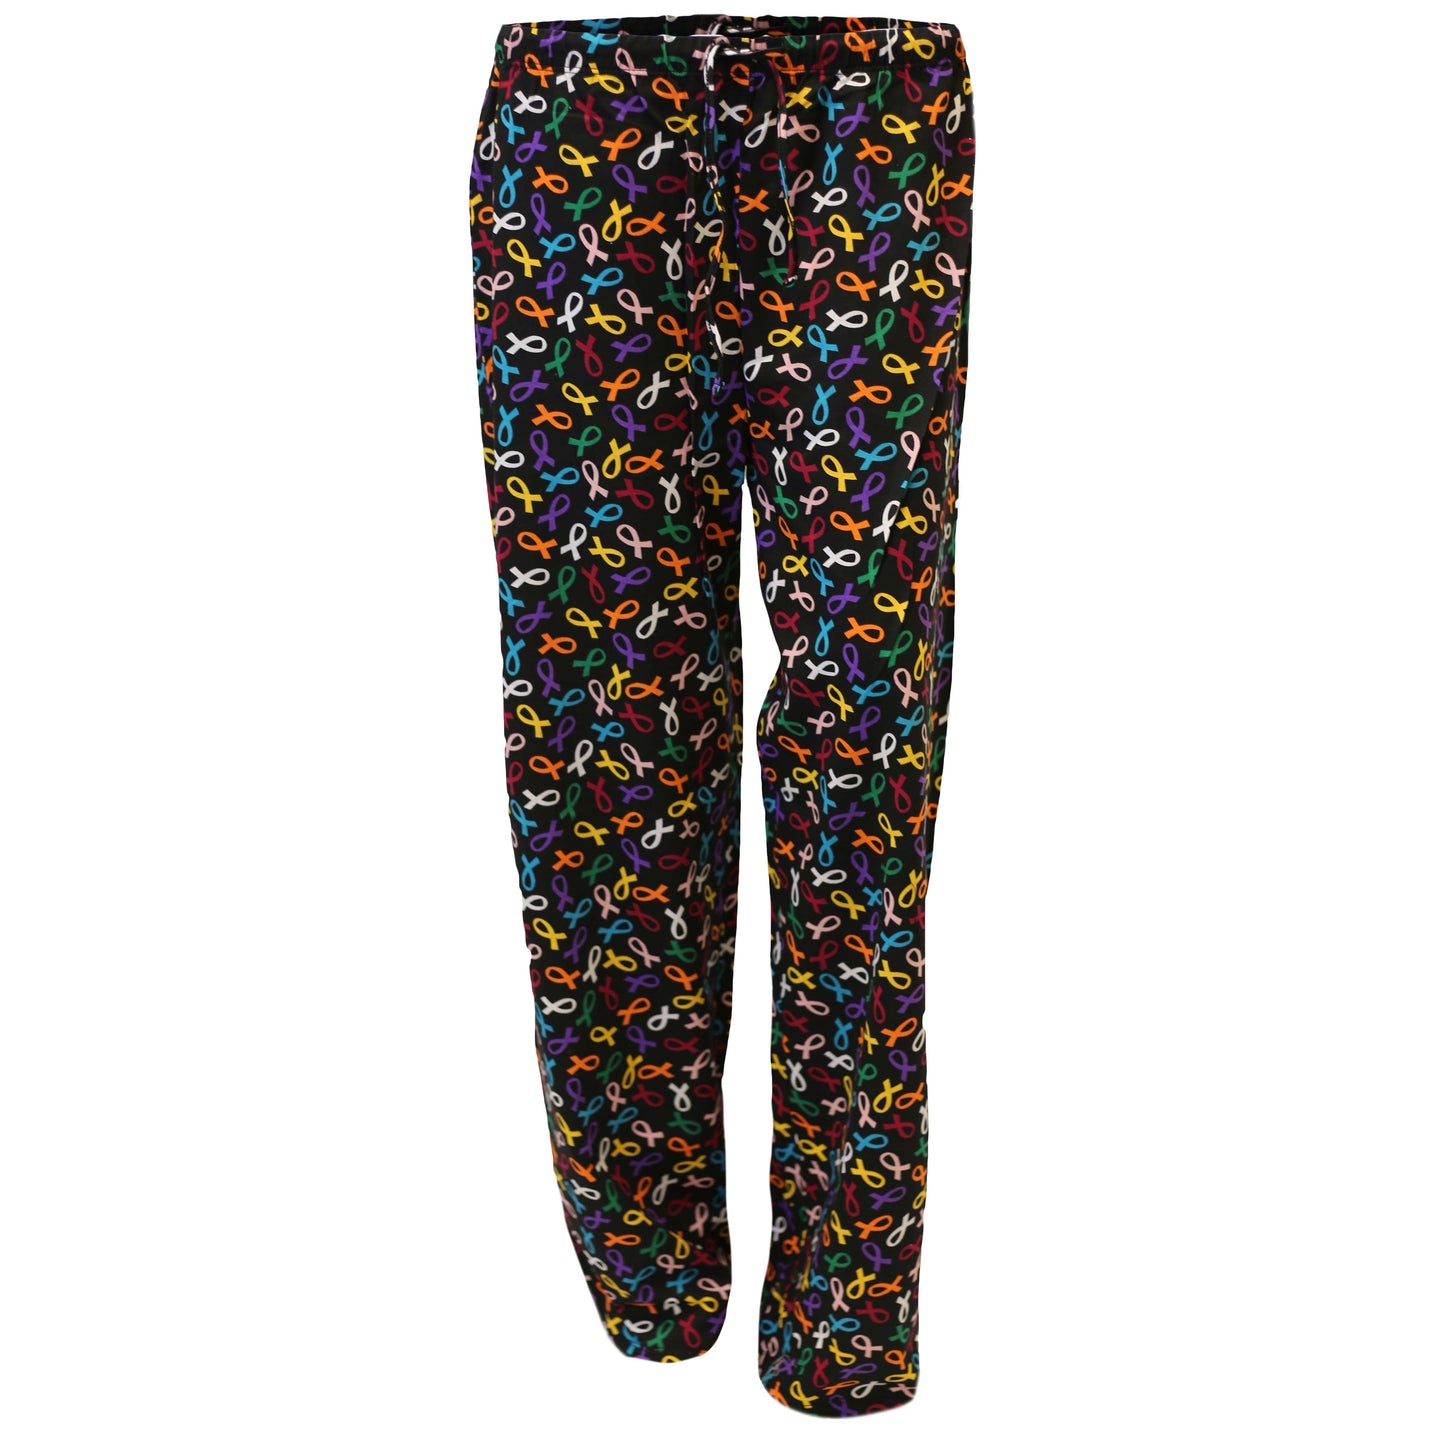 Women's 'Multi Ribbon' Cancer Awareness Pajama Pants, by Live For Life Hope For All®